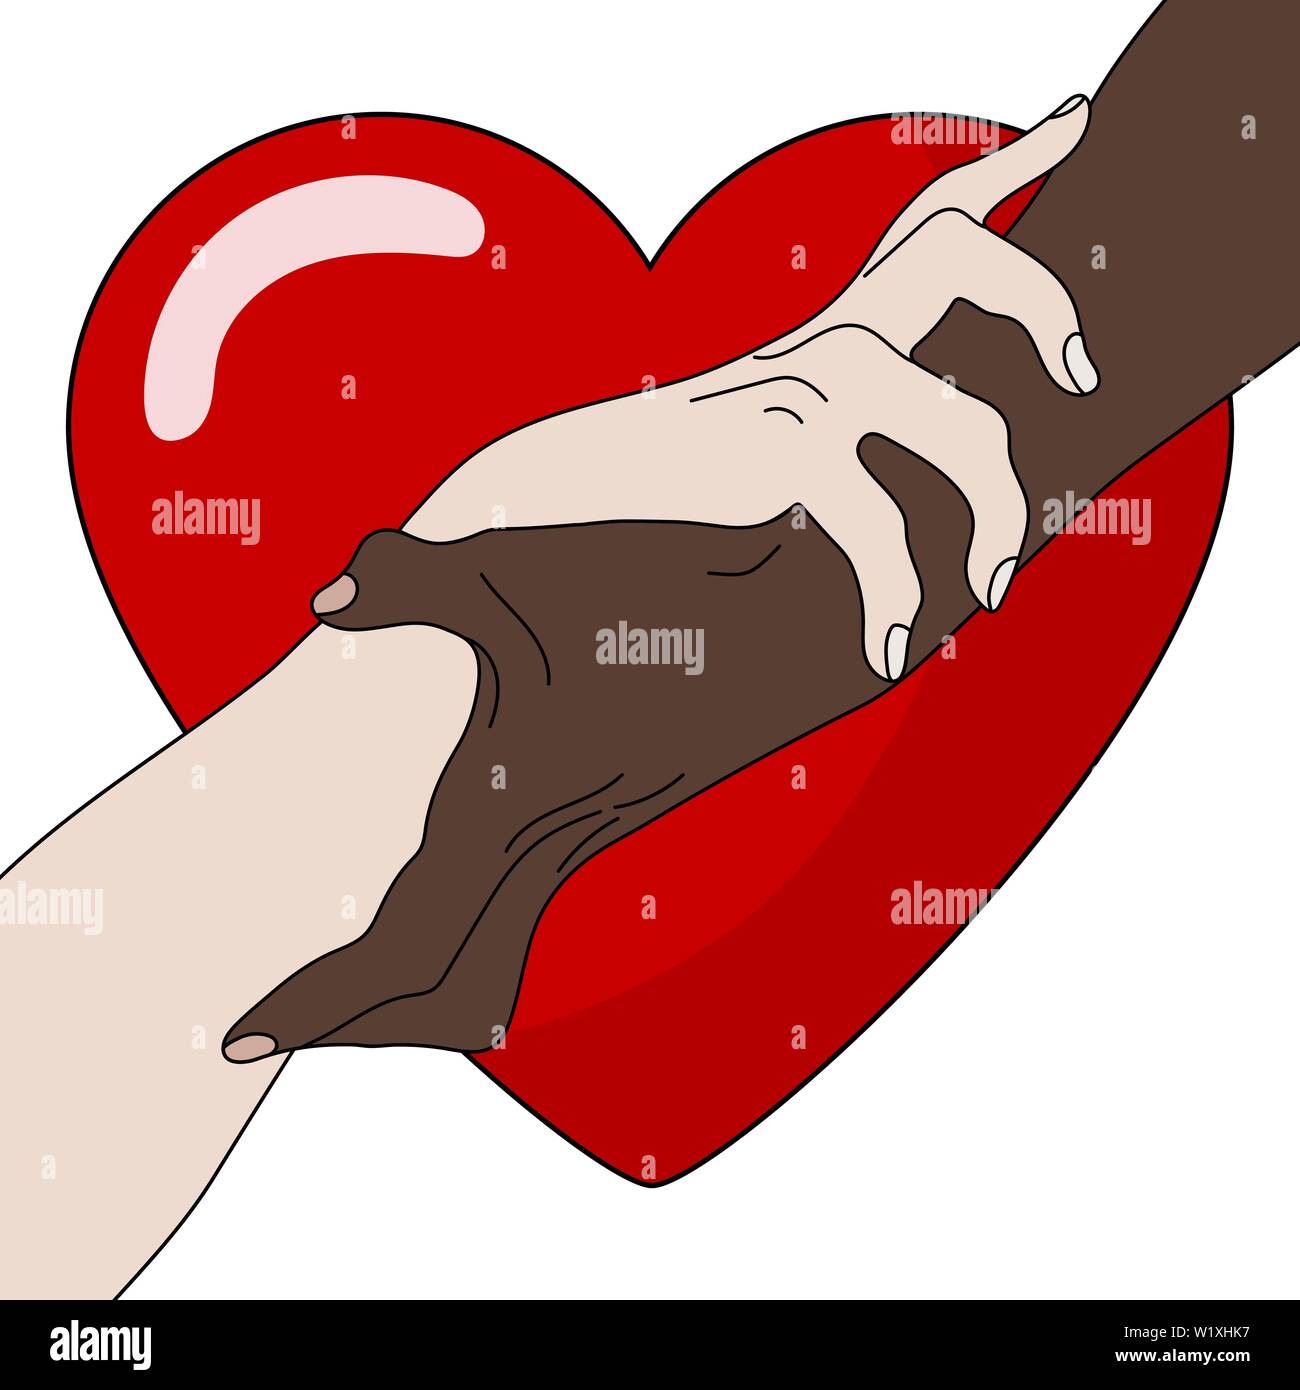 Charity Concept. Giving Love. Holding Hands Showing Unity. Multinational equality. Team, partner, alliance concept. Relationship icon. Vector illustra Stock Vector